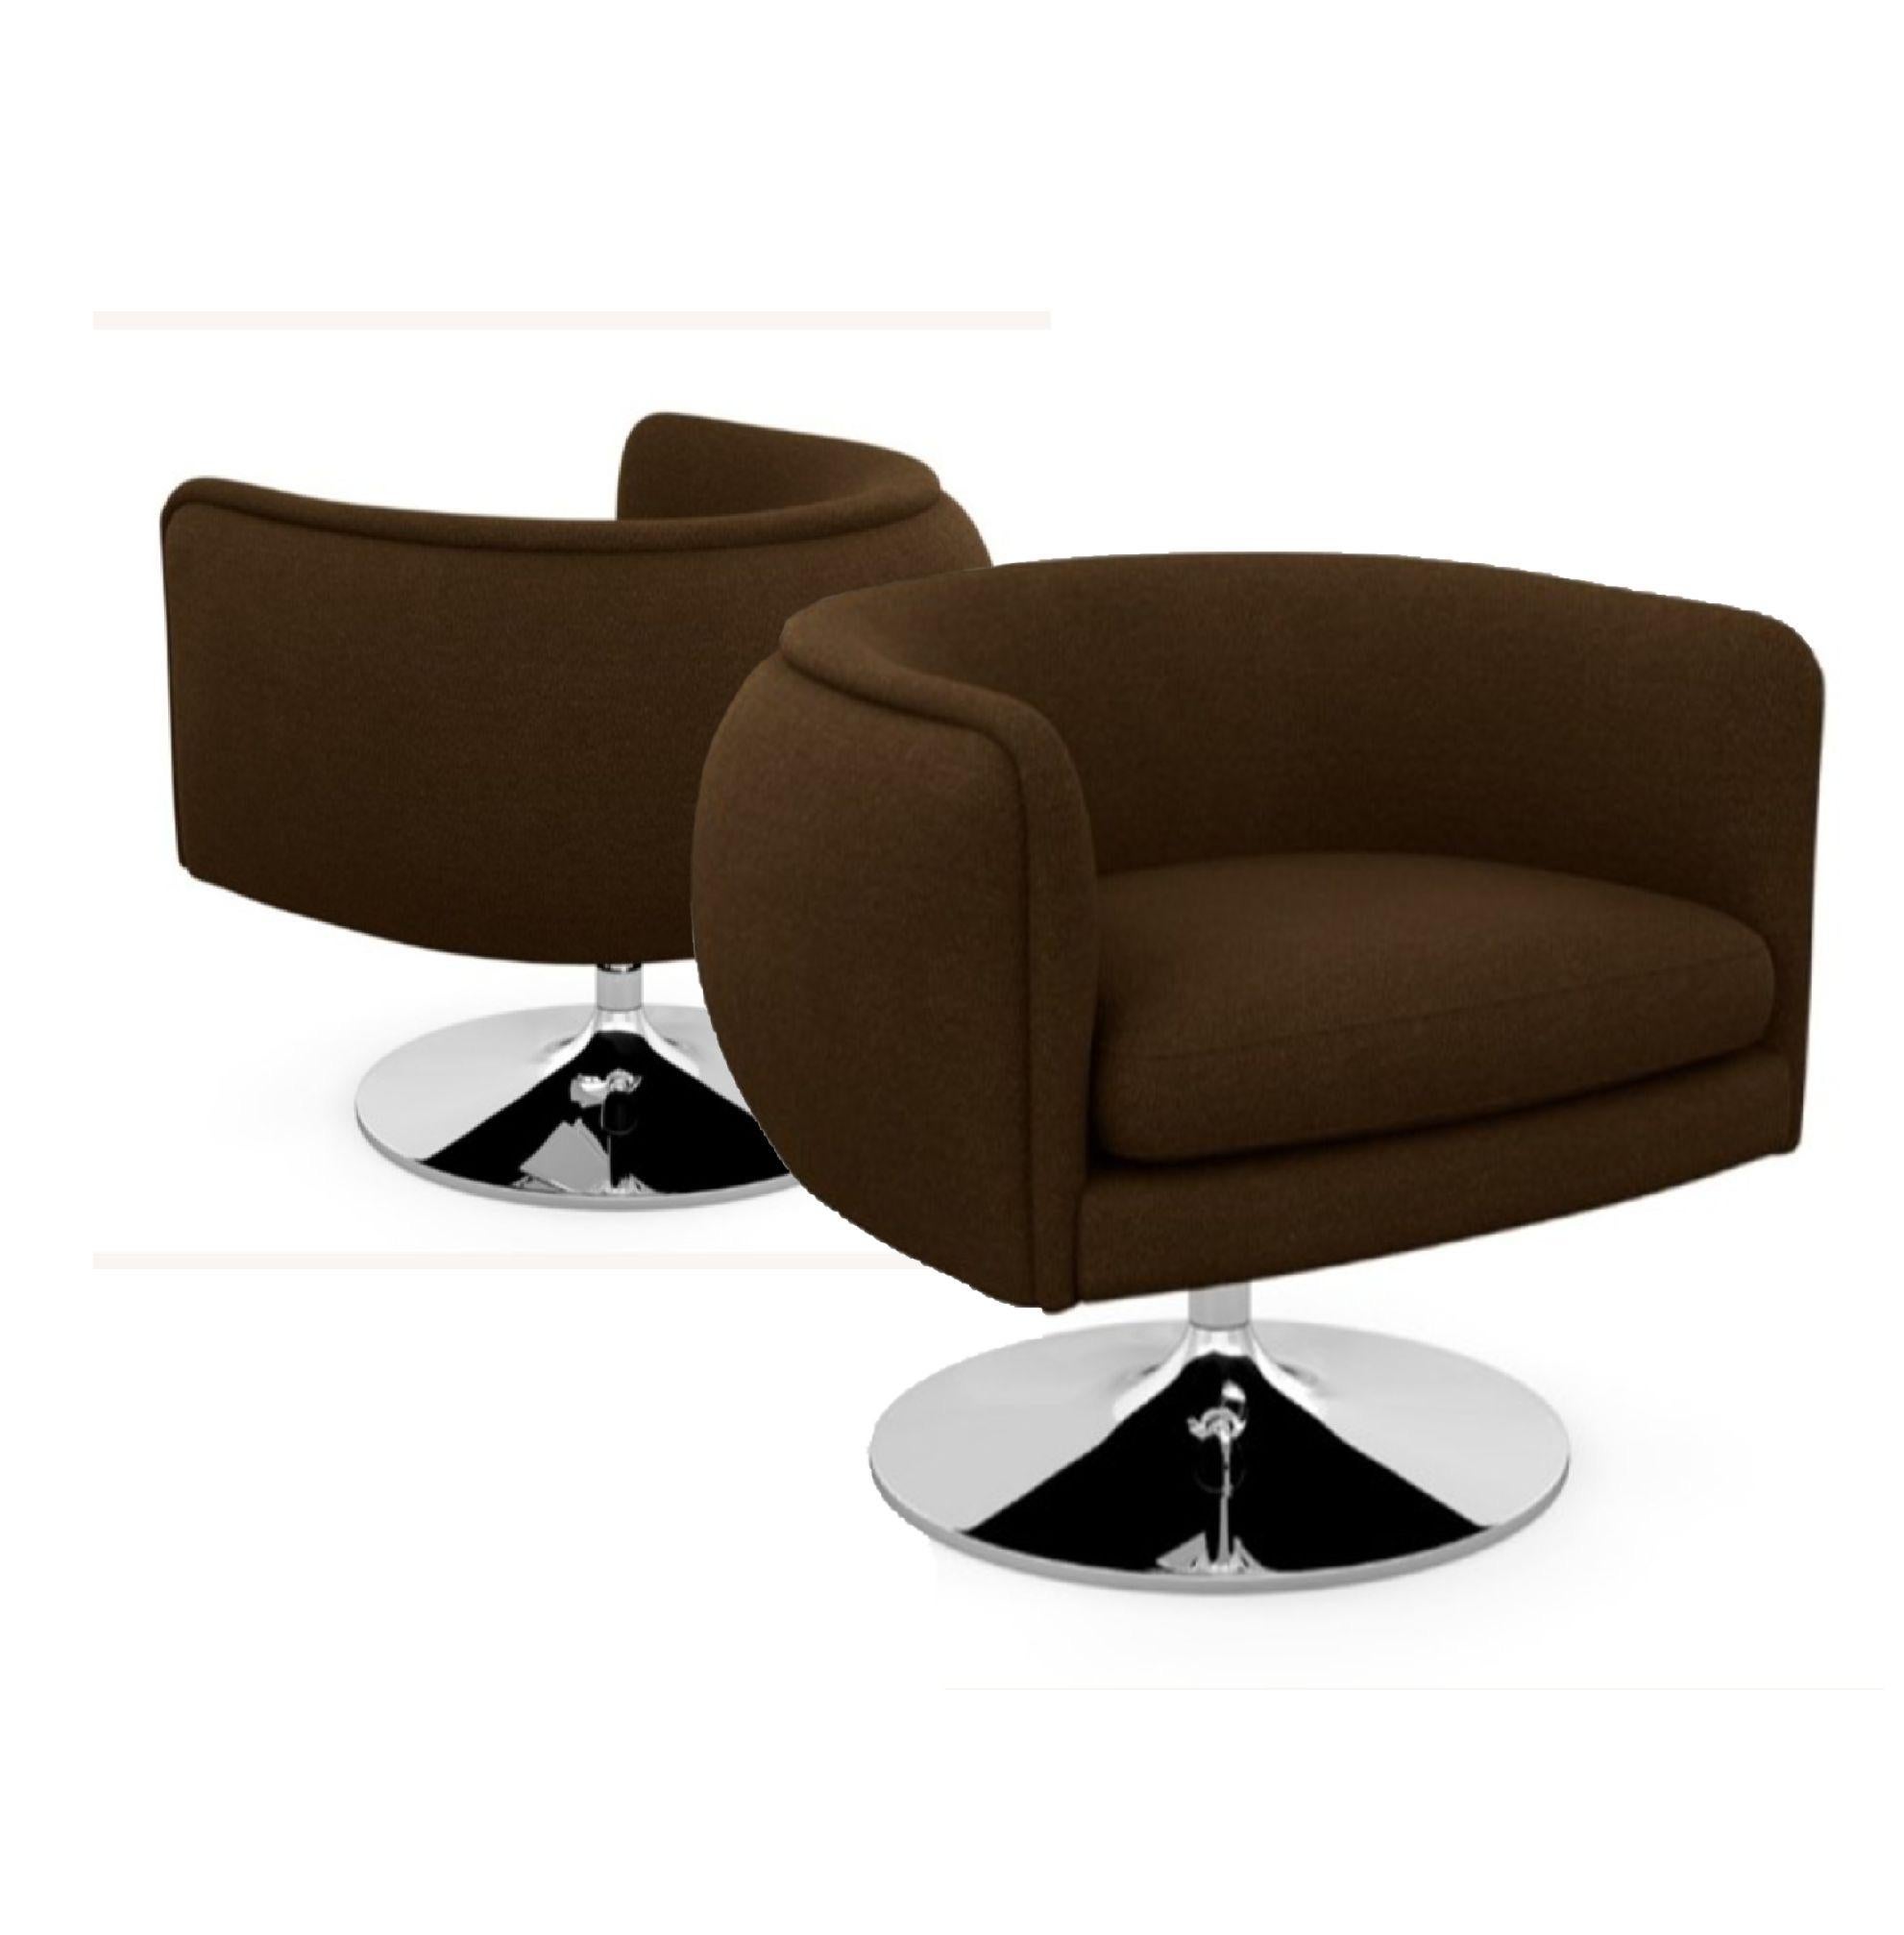 Knoll D’Urso modern swivel club lounge chair in Pumpernickel wool Bouclé, stainless steel base. The D’Urso swivel chair strikes a playful balance between formality and whimsy, offering a modern twist on the classic cocktail lounge chair. Designed by